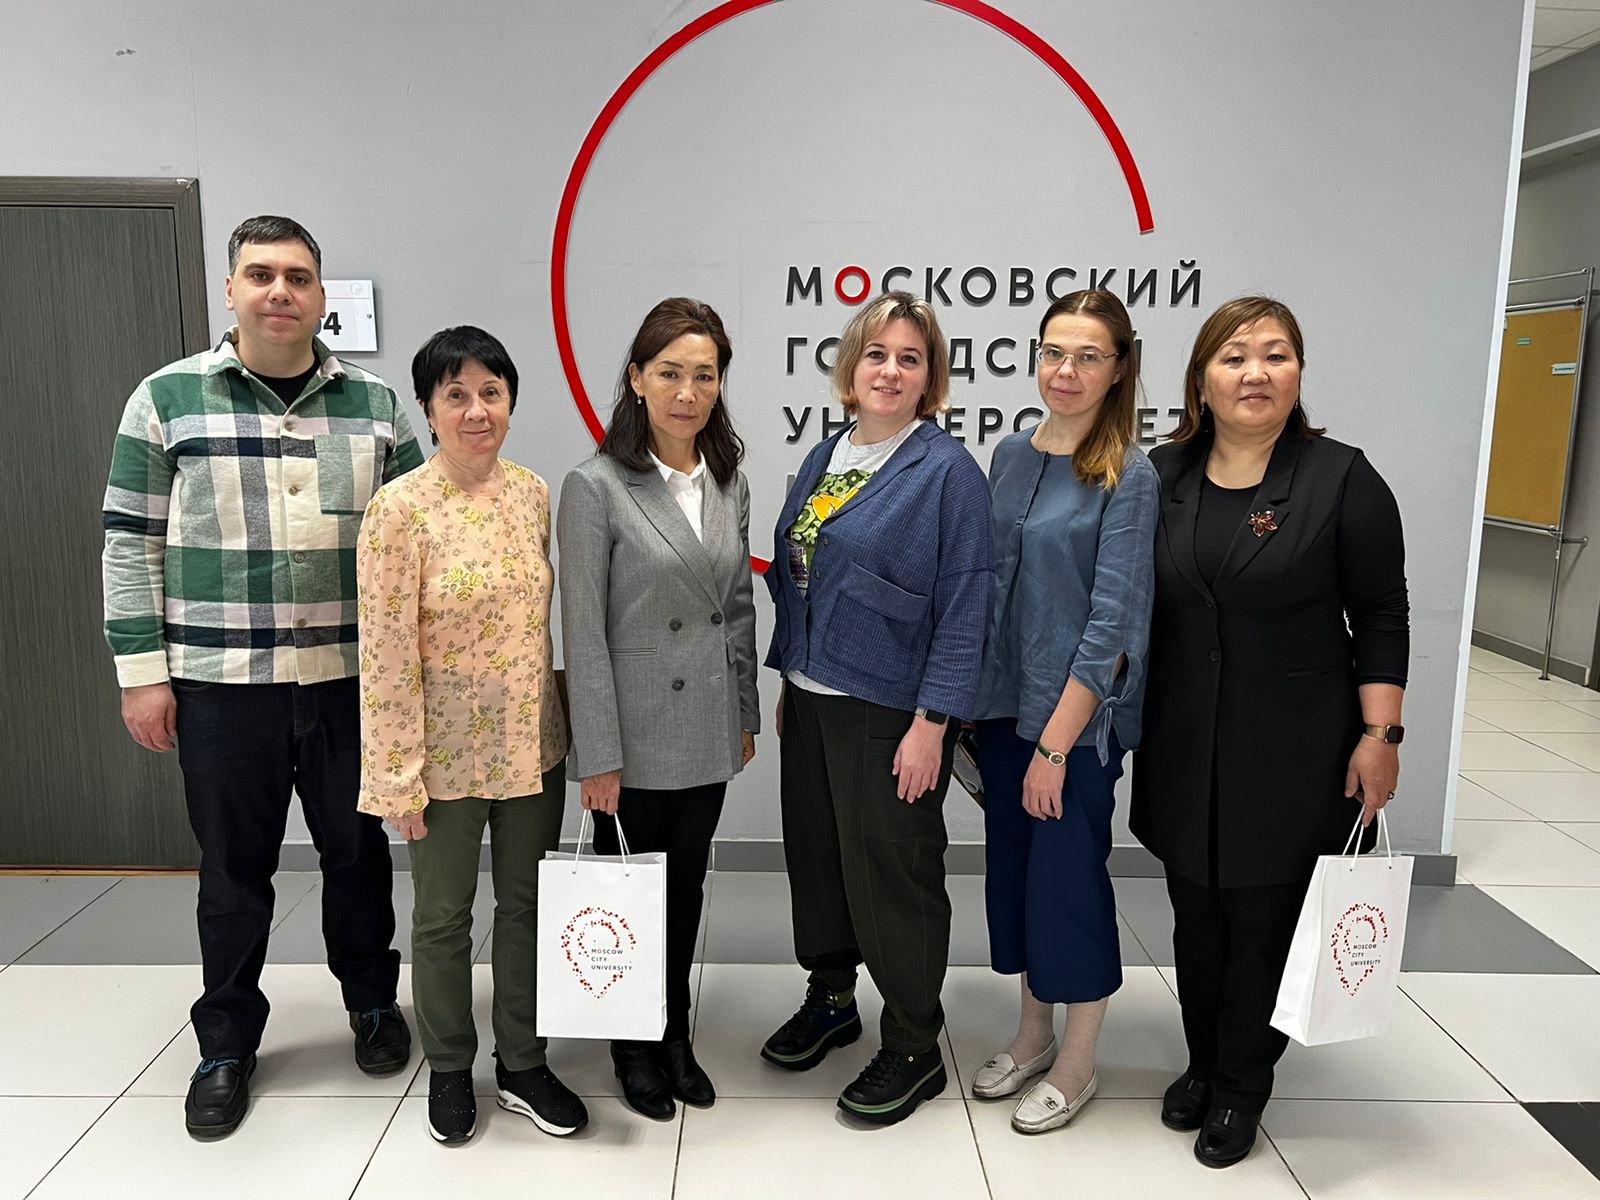 Meeting with representatives of the Mongolian National University of Education